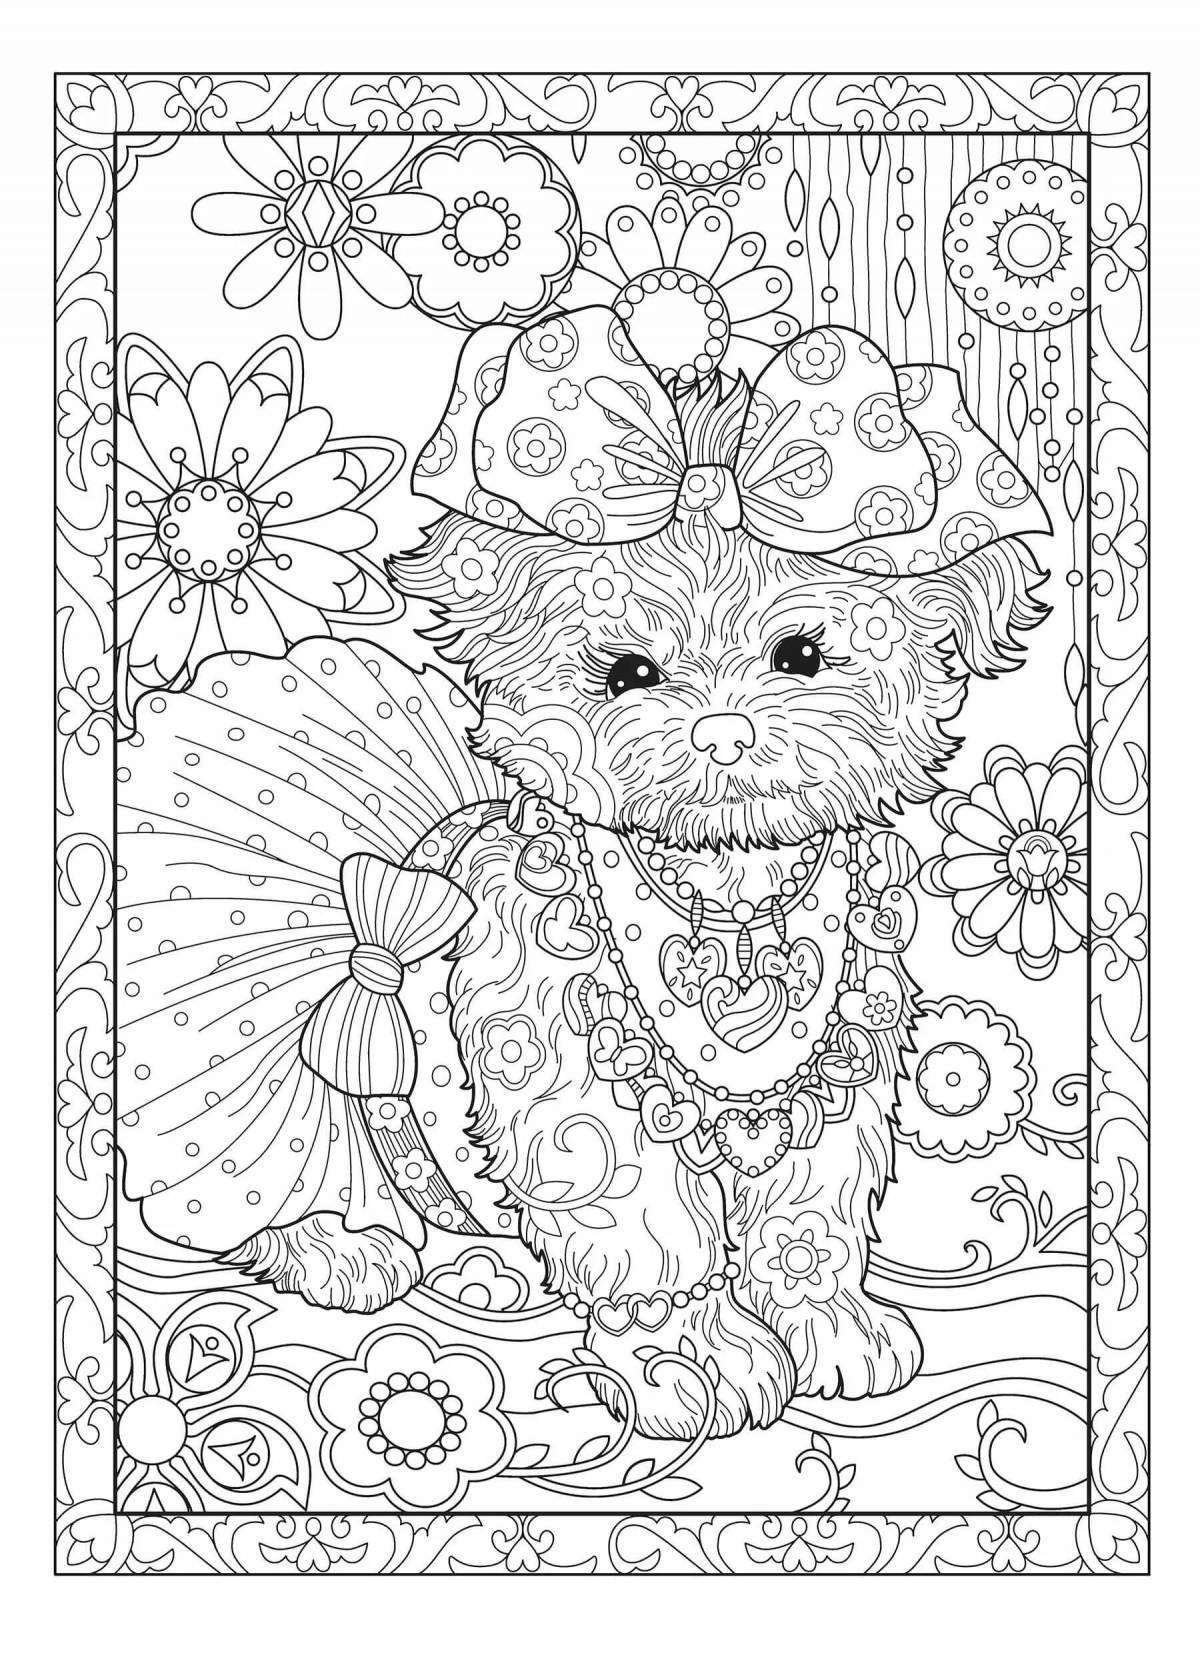 Great anti-stress coloring book for girls 9-10 years old